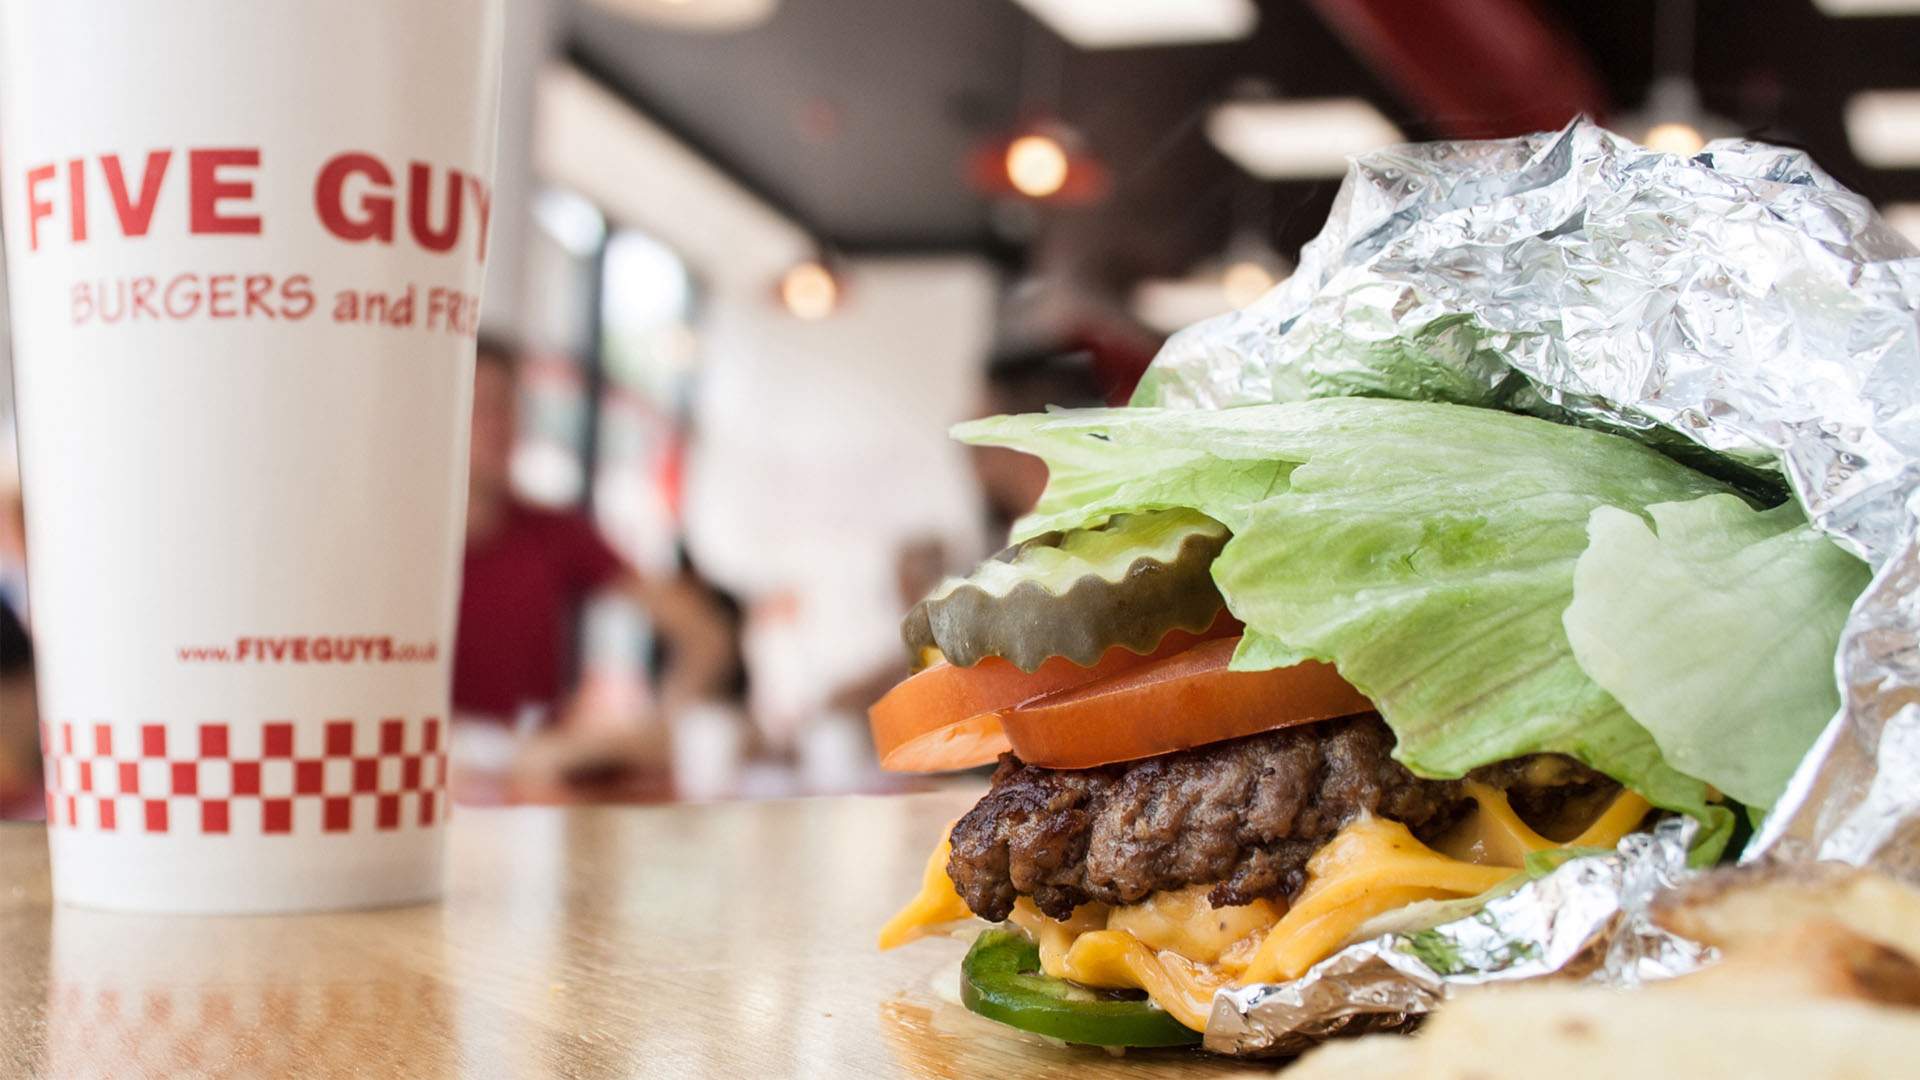 Cult-Favourite US Chain Five Guys Will Open Its First Australian Eatery in Penrith This Year